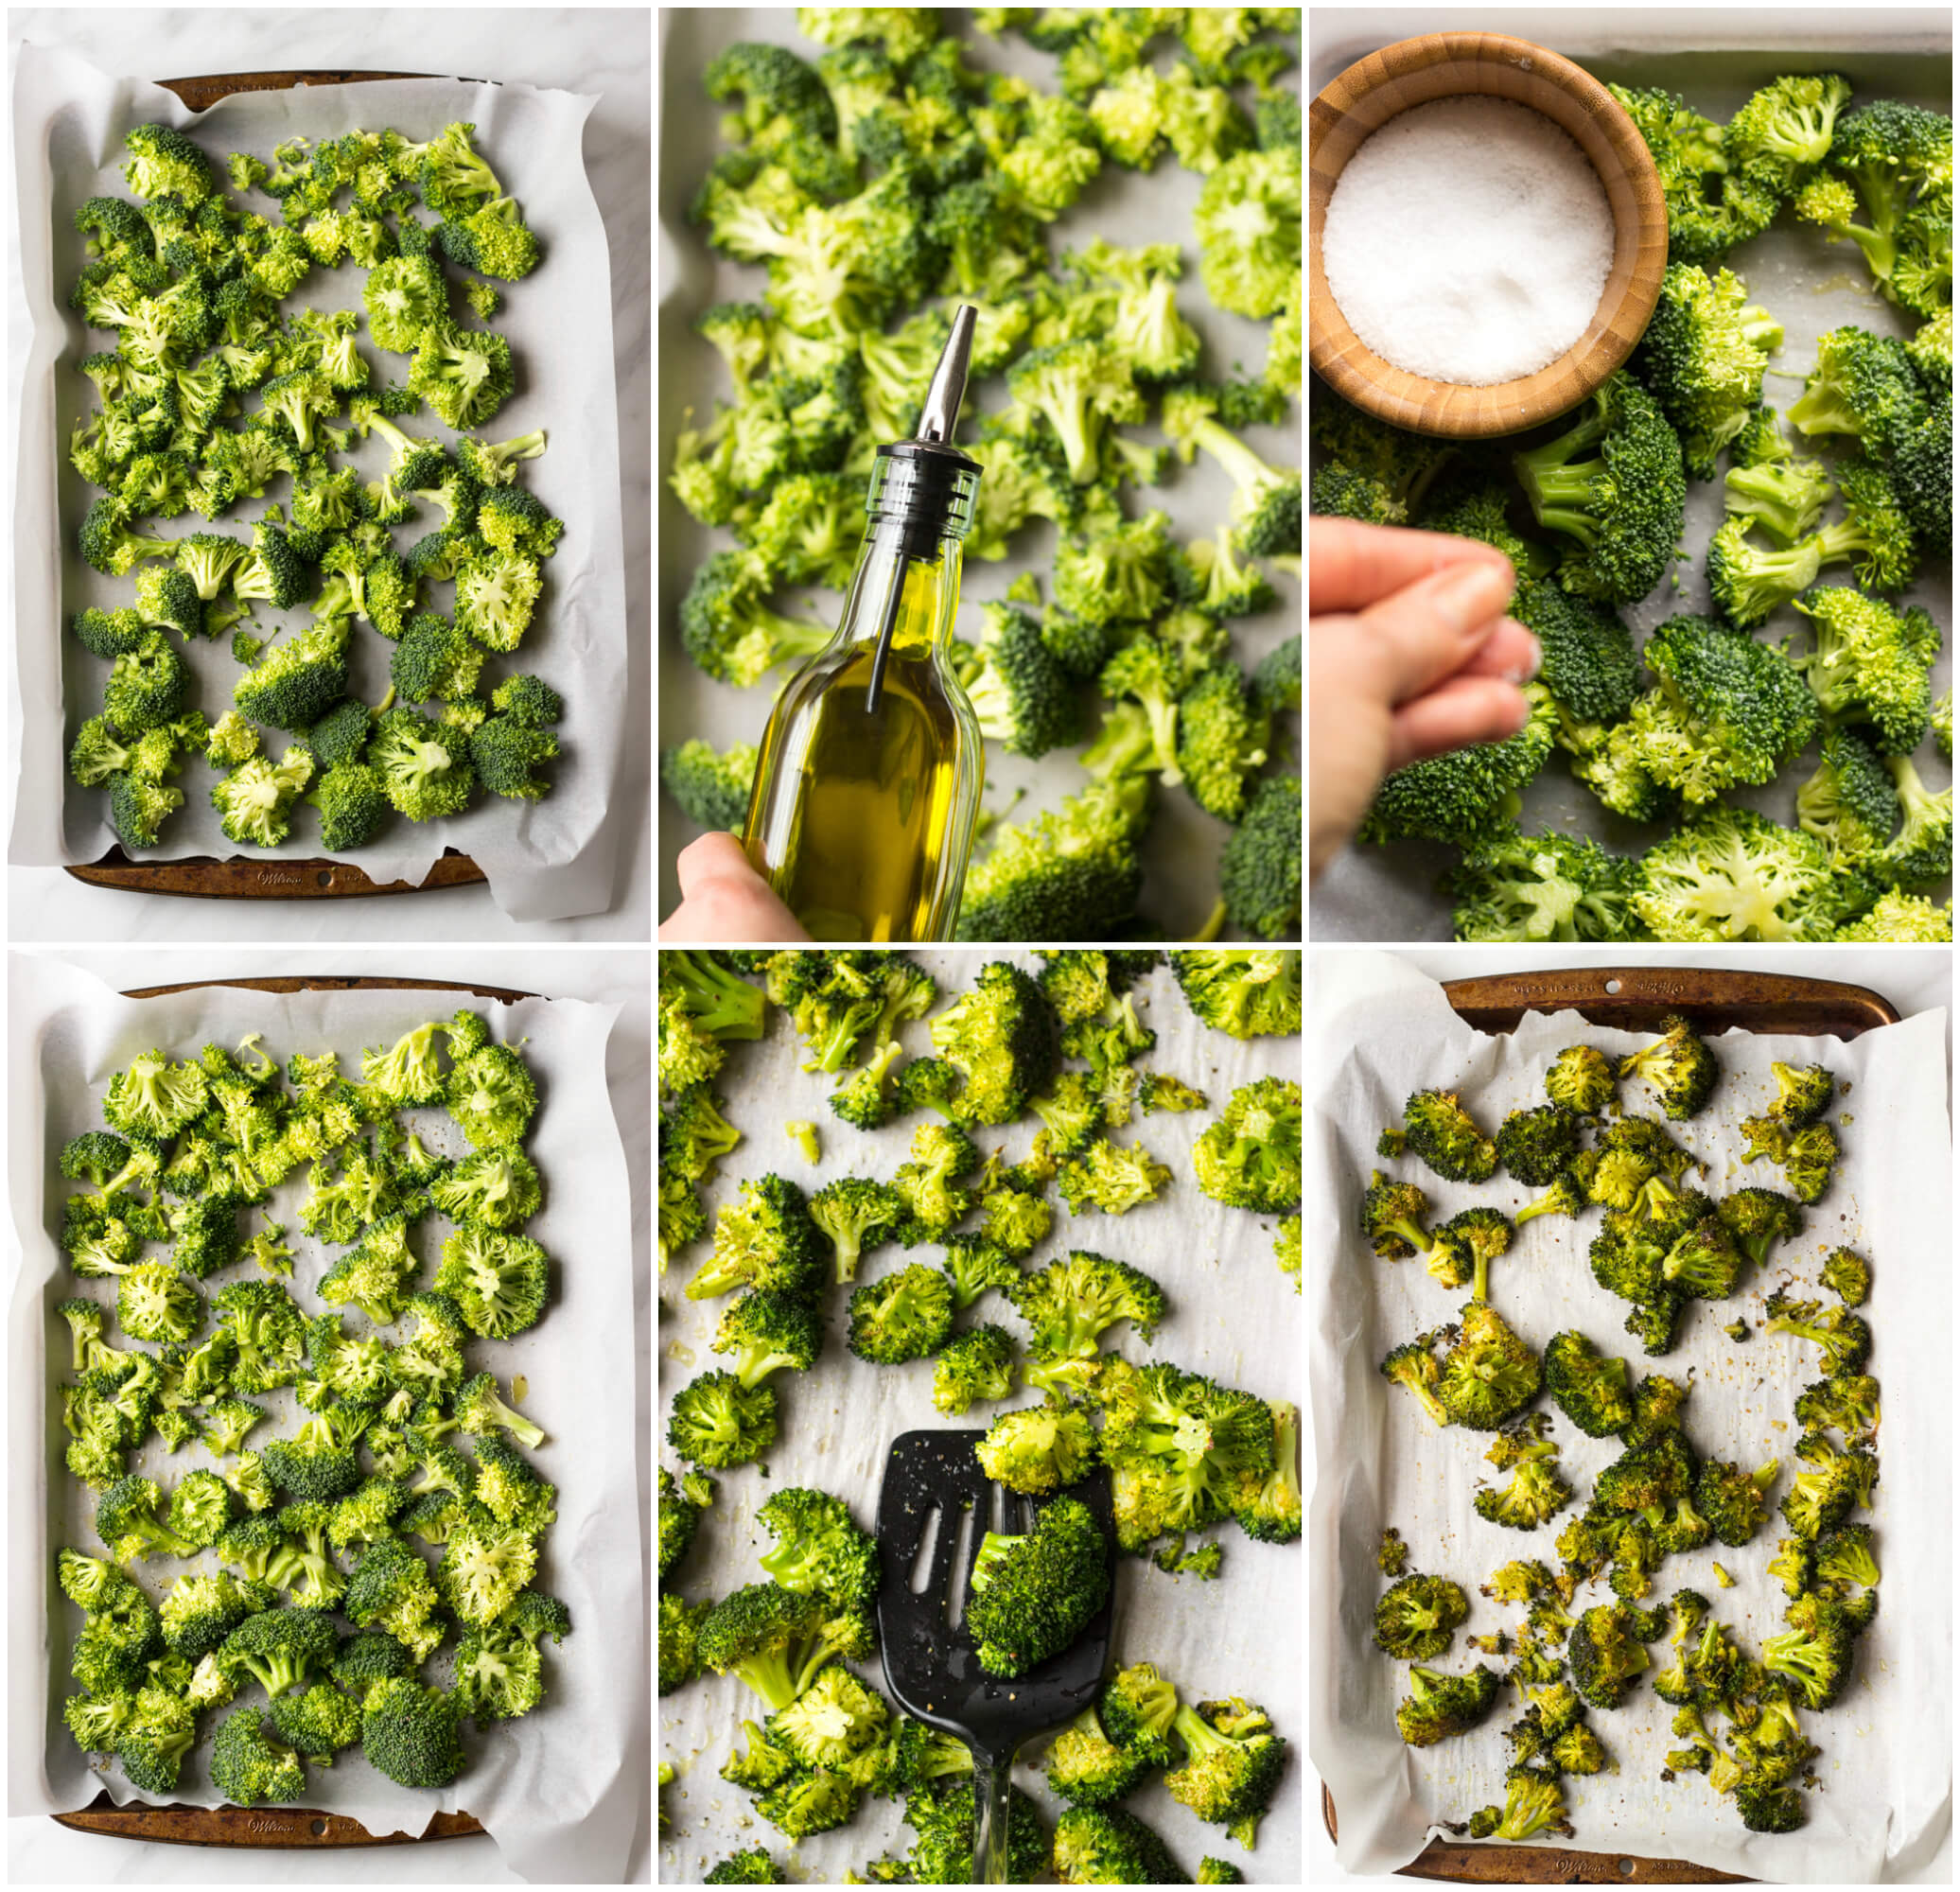 Step by step instructions for oven baked broccoli recipe with olive oil